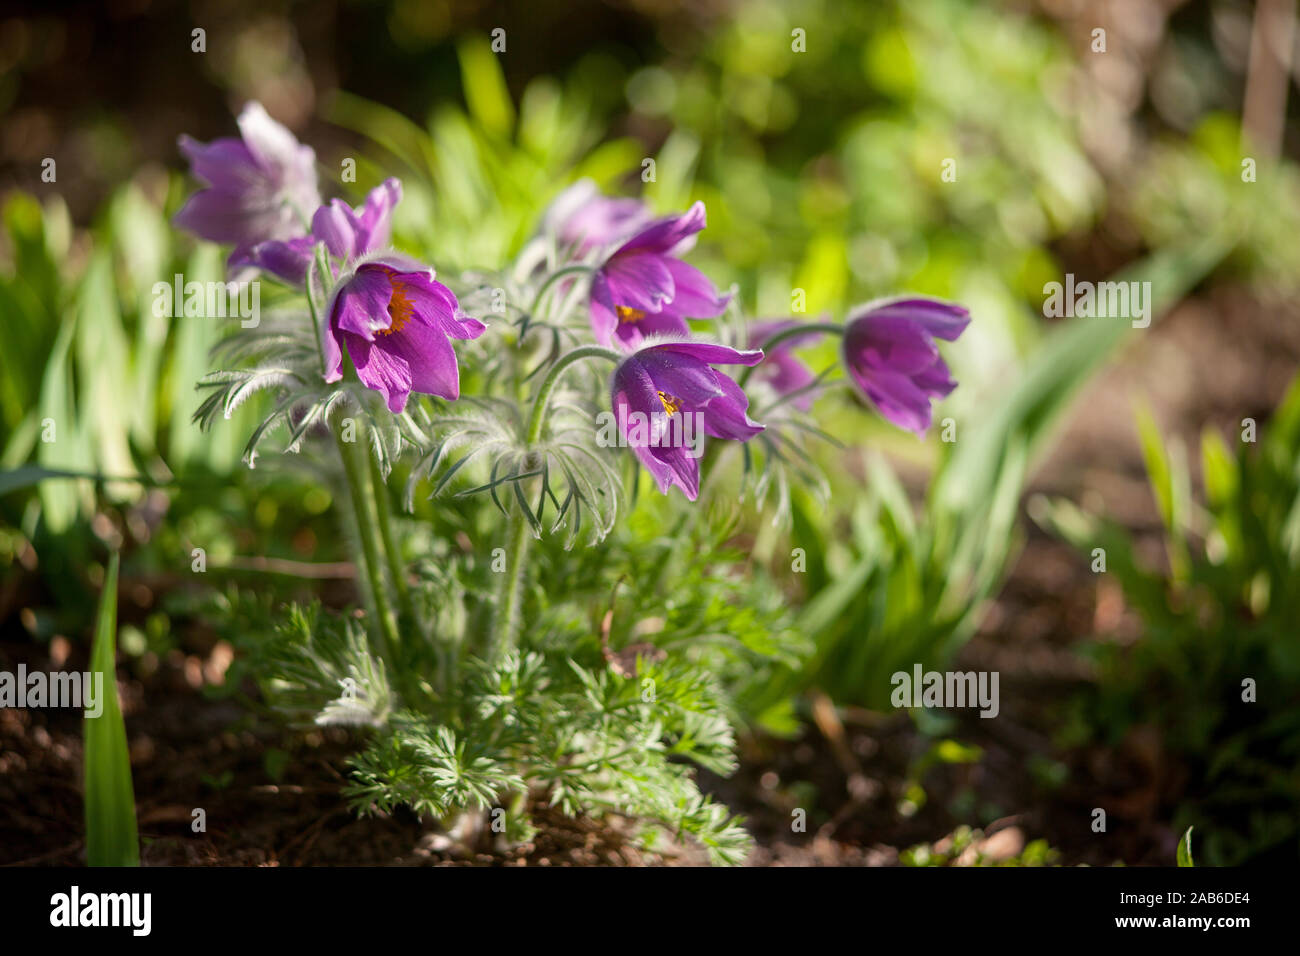 Eastern pasque flowers or Rock lily, prairie crocus, cutleaf anemone (Pulsatilla patens) blossom. Close up. Selective focus Stock Photo